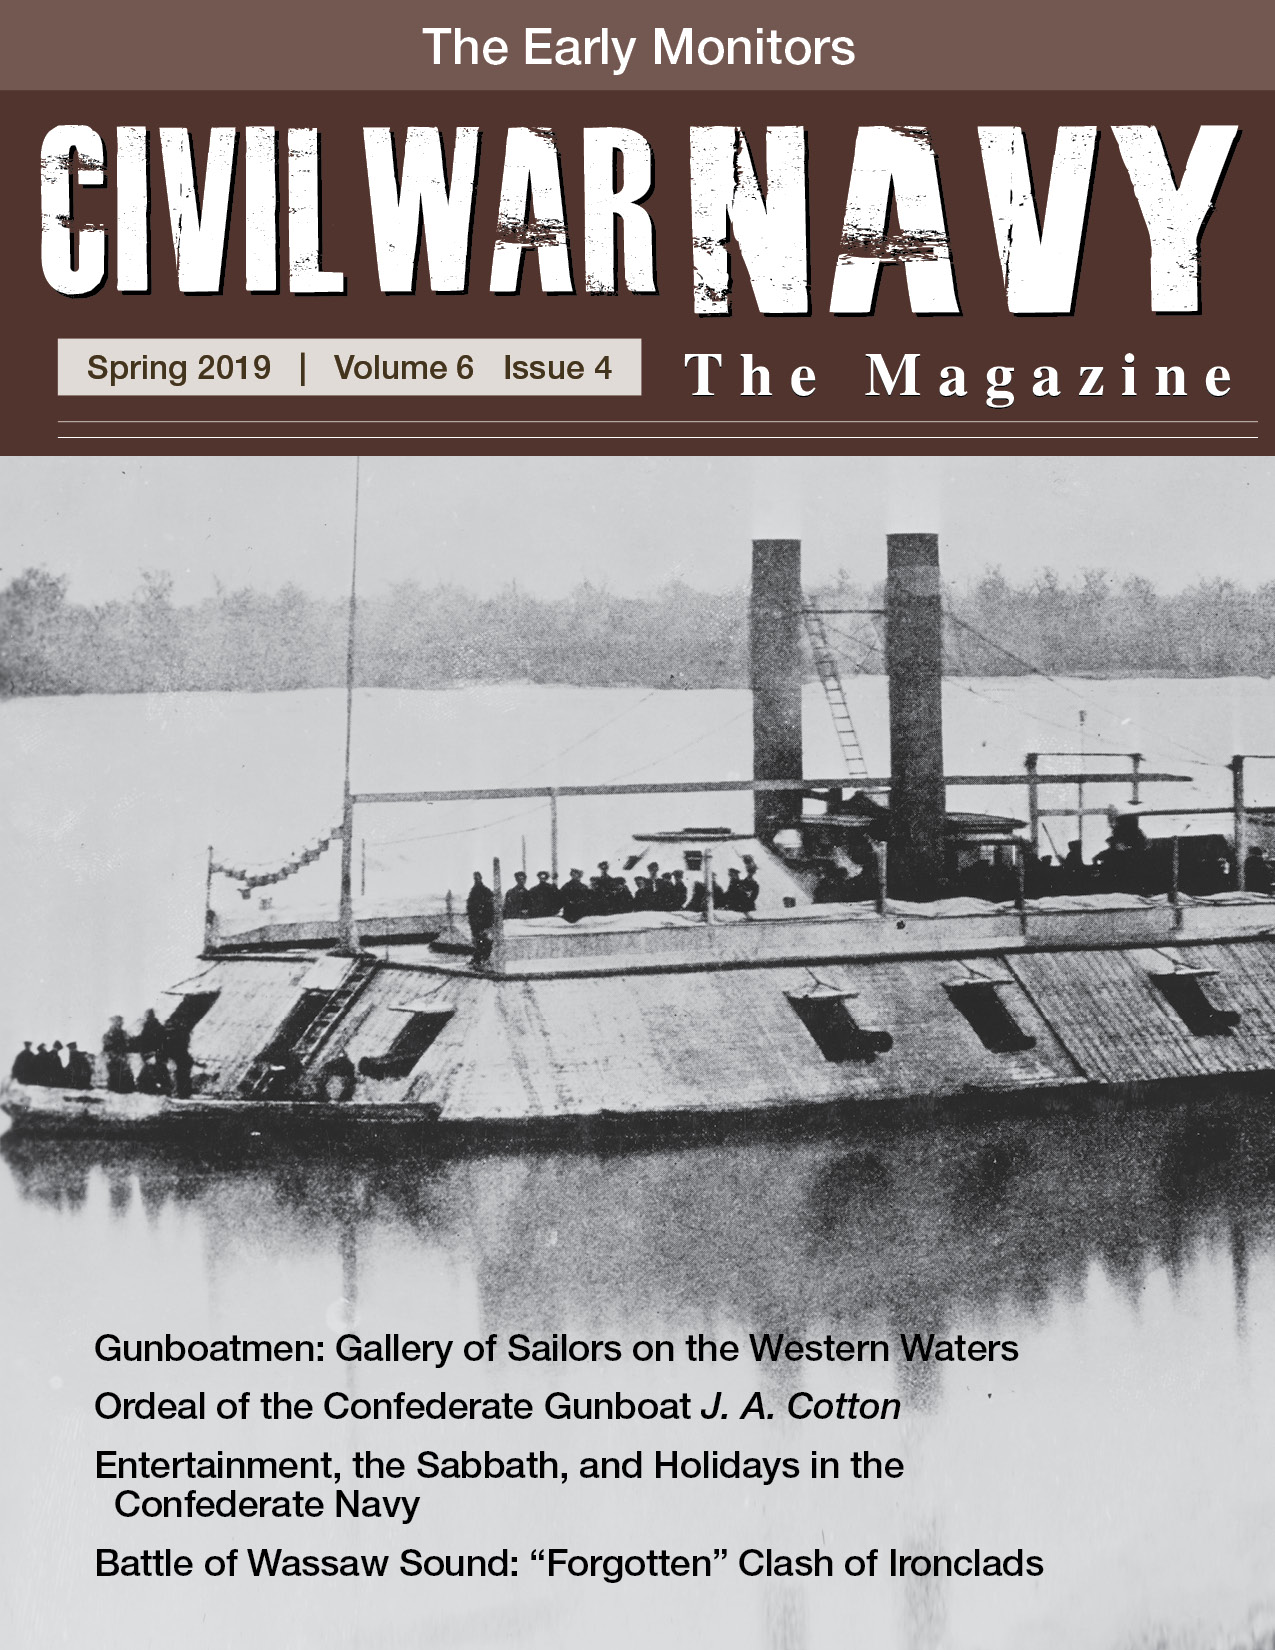 during the early years of the civil war, the northern navy concentrated on: